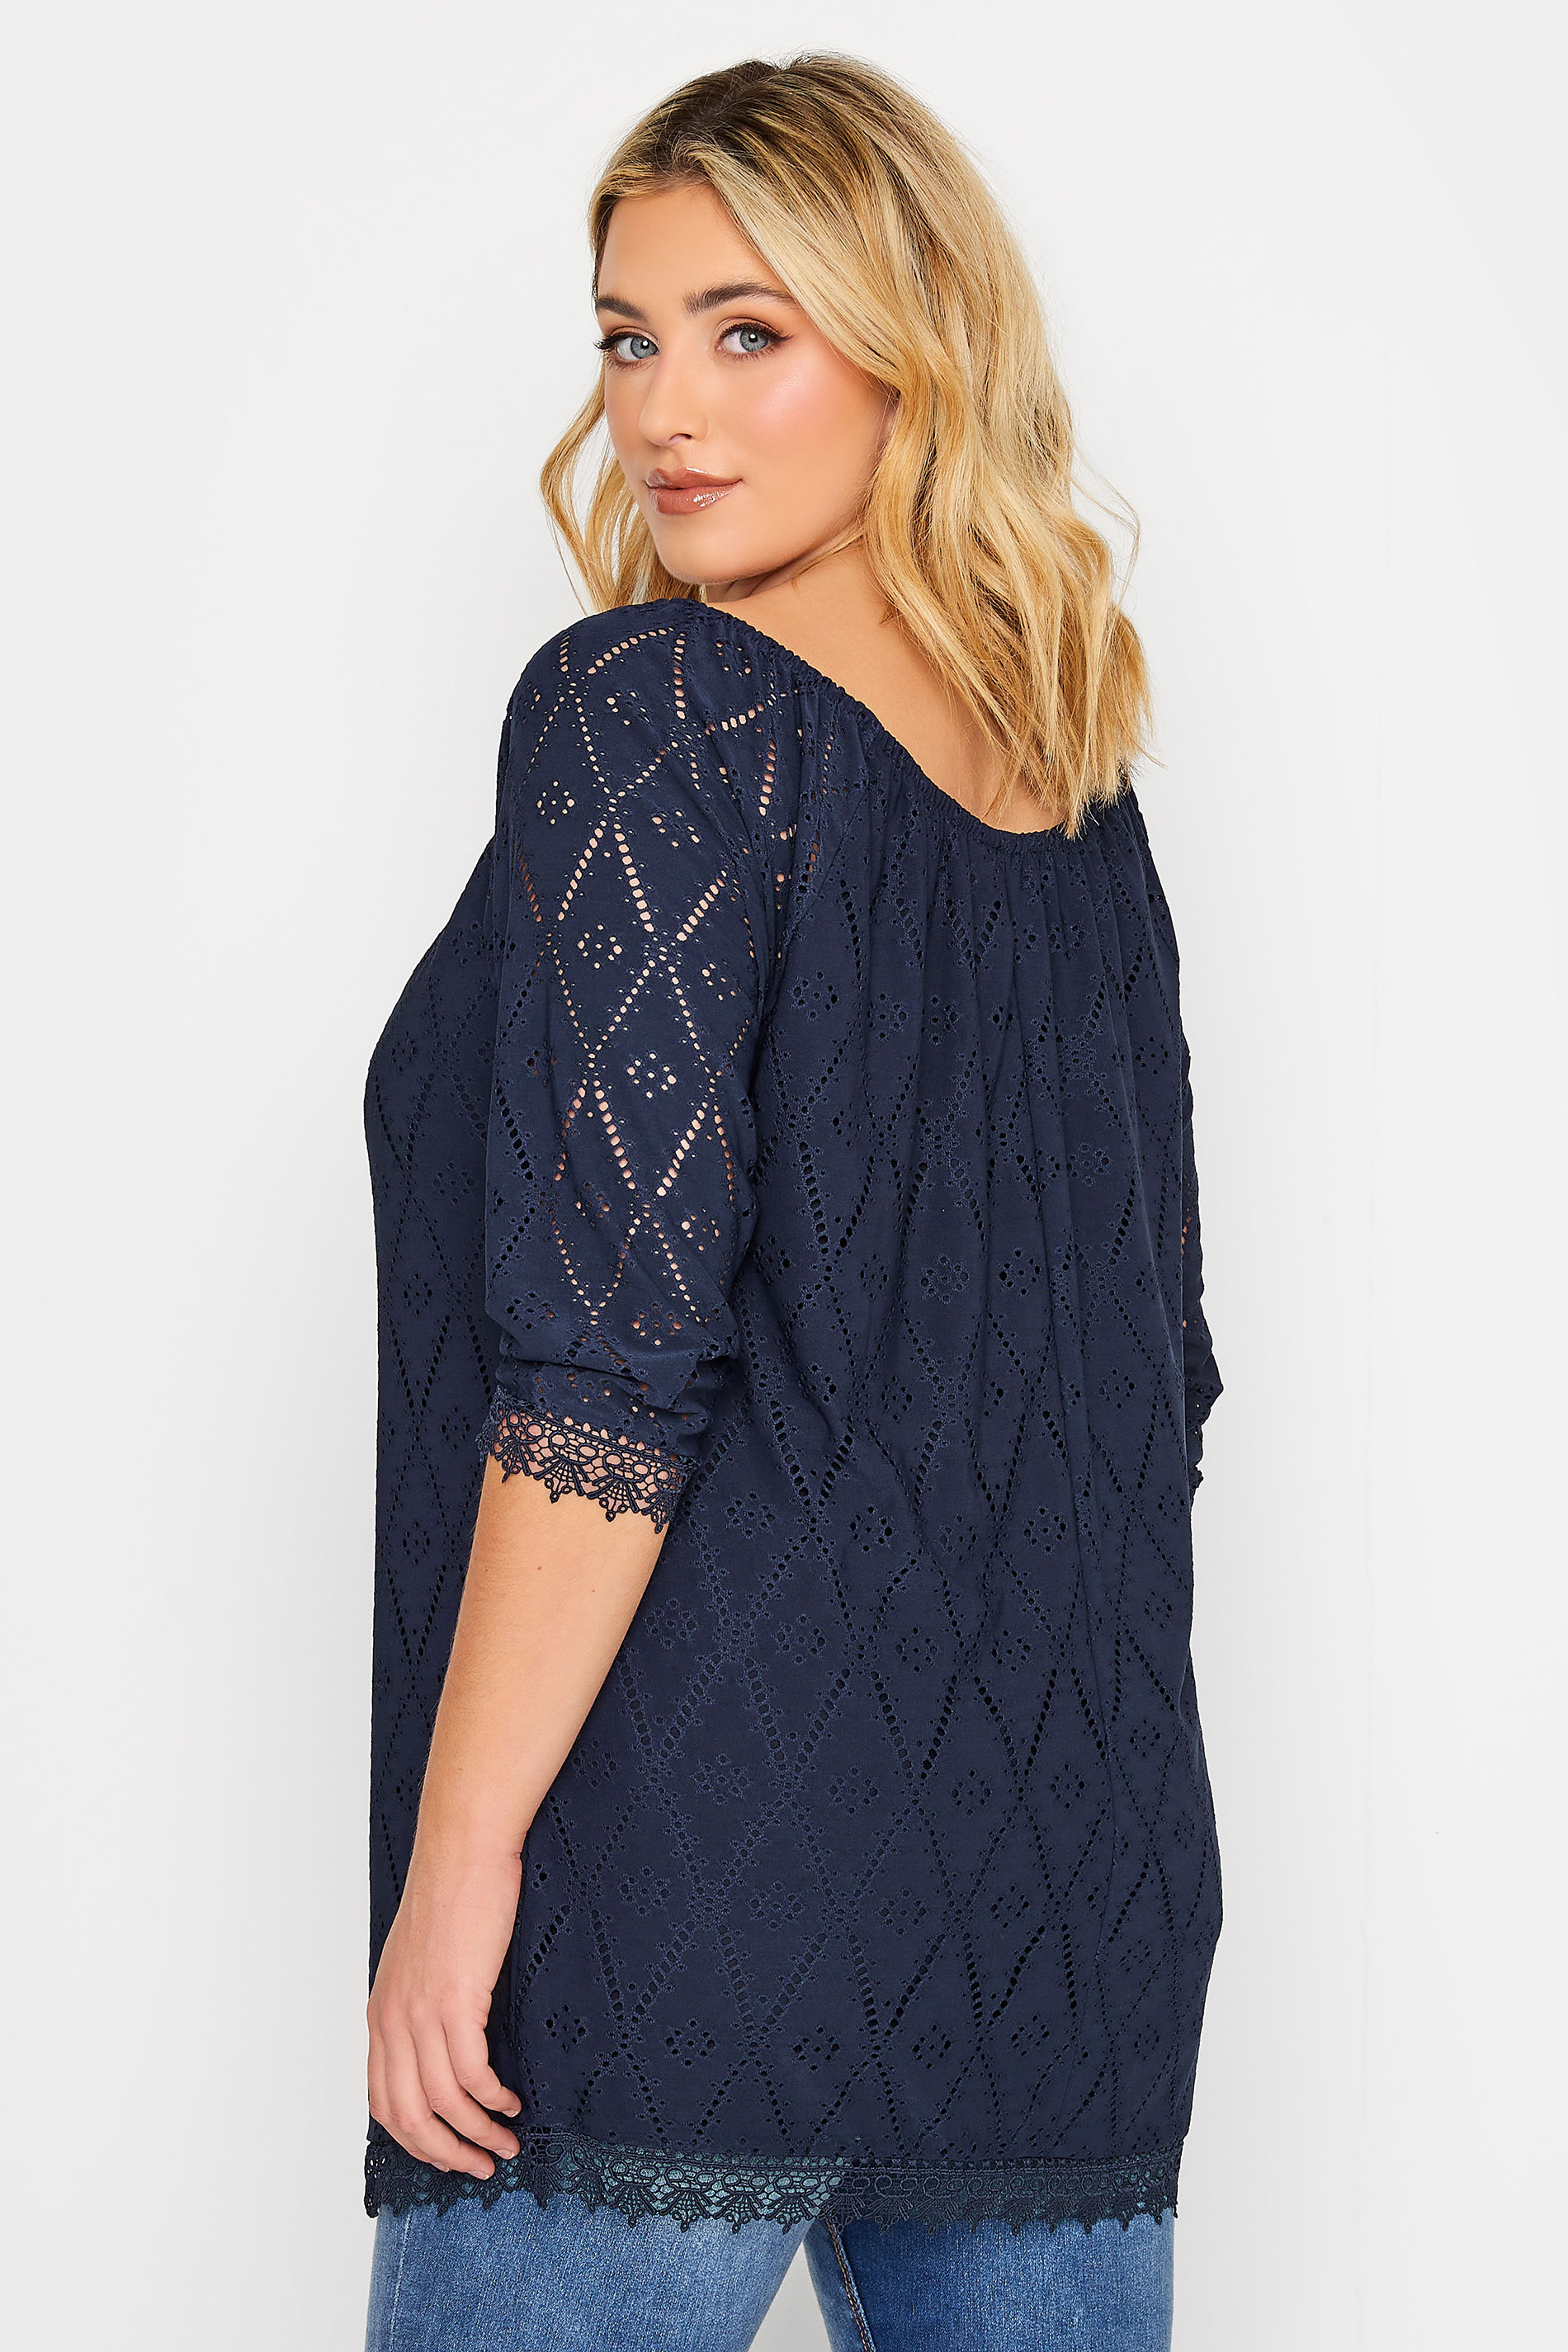 YOURS Plus Size Navy Blue Pointelle Lace Trim Top | Yours Clothing 3